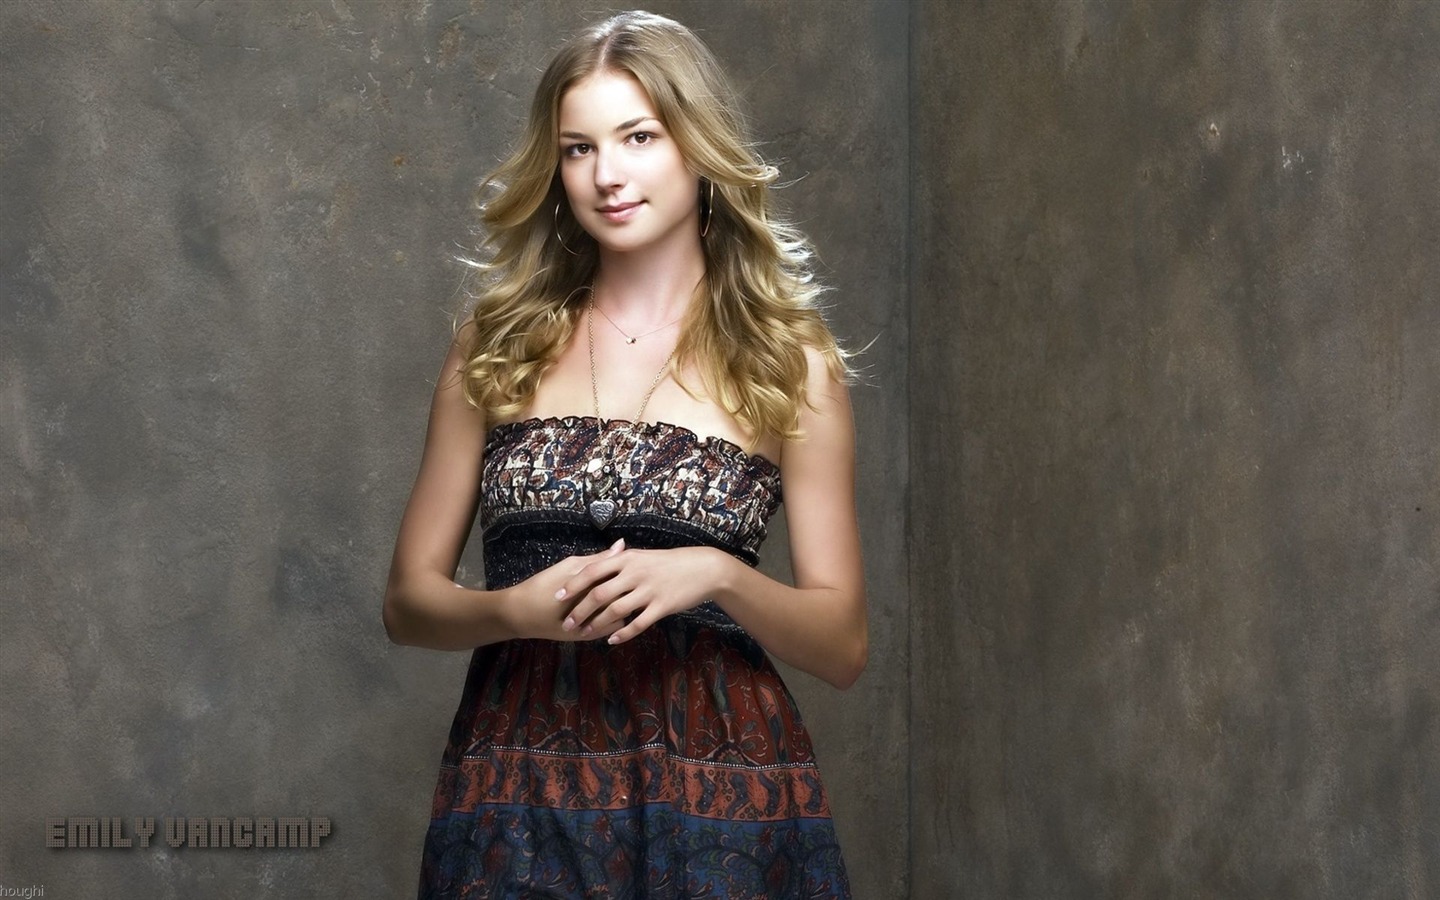 Emily VanCamp #008 - 1440x900 Wallpapers Pictures Photos Images